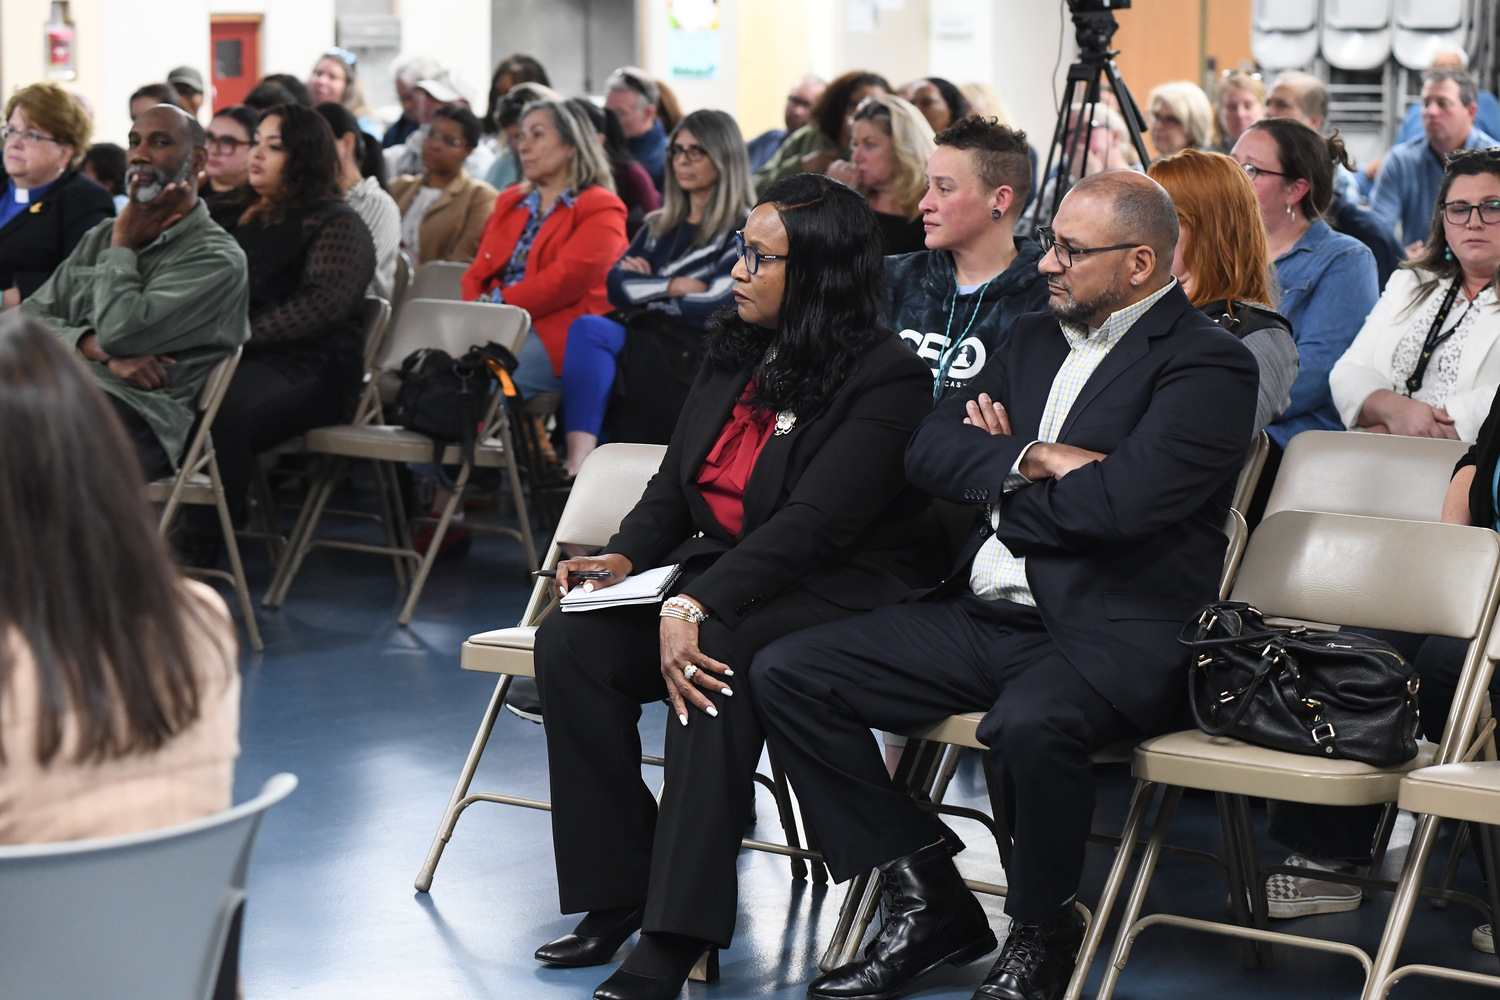 Dr. Fatima Morrell and her husband, James, listen at theBoard of Education meeting, which centered on her appointment as the next superintendent of schools at the Southampton Union Free School District. DOUG KUNTZ